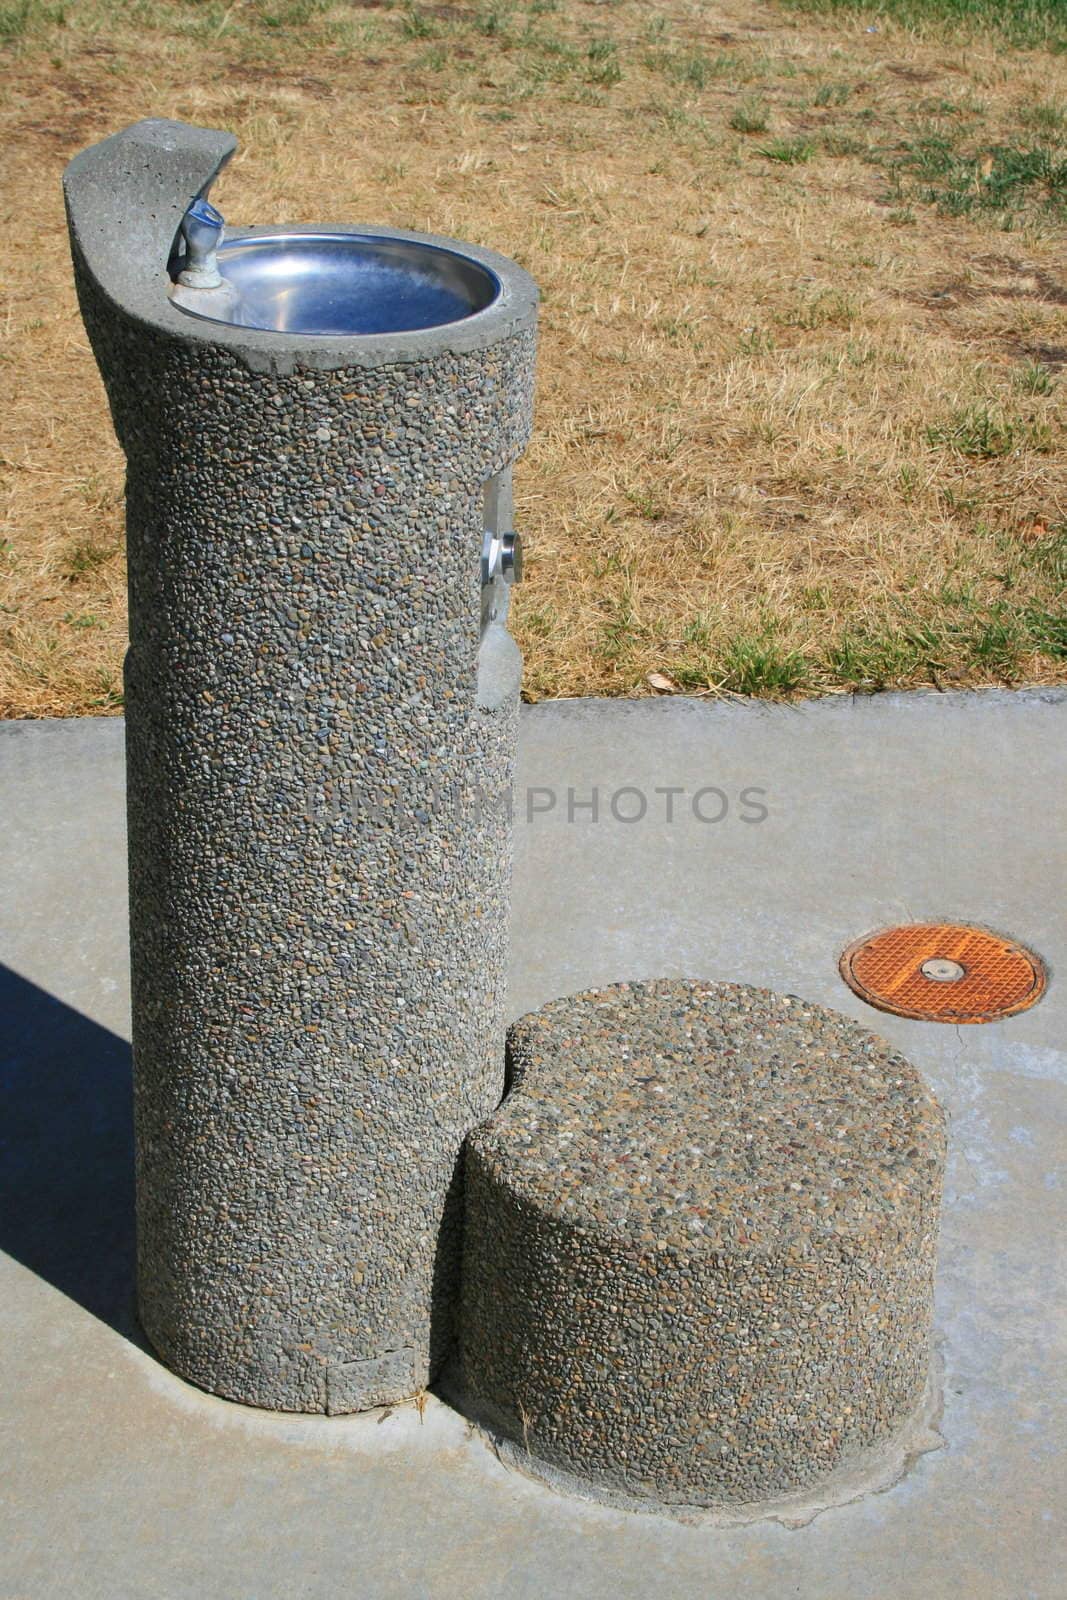 Drinking fountain for kids on a sidewalk in a park.
